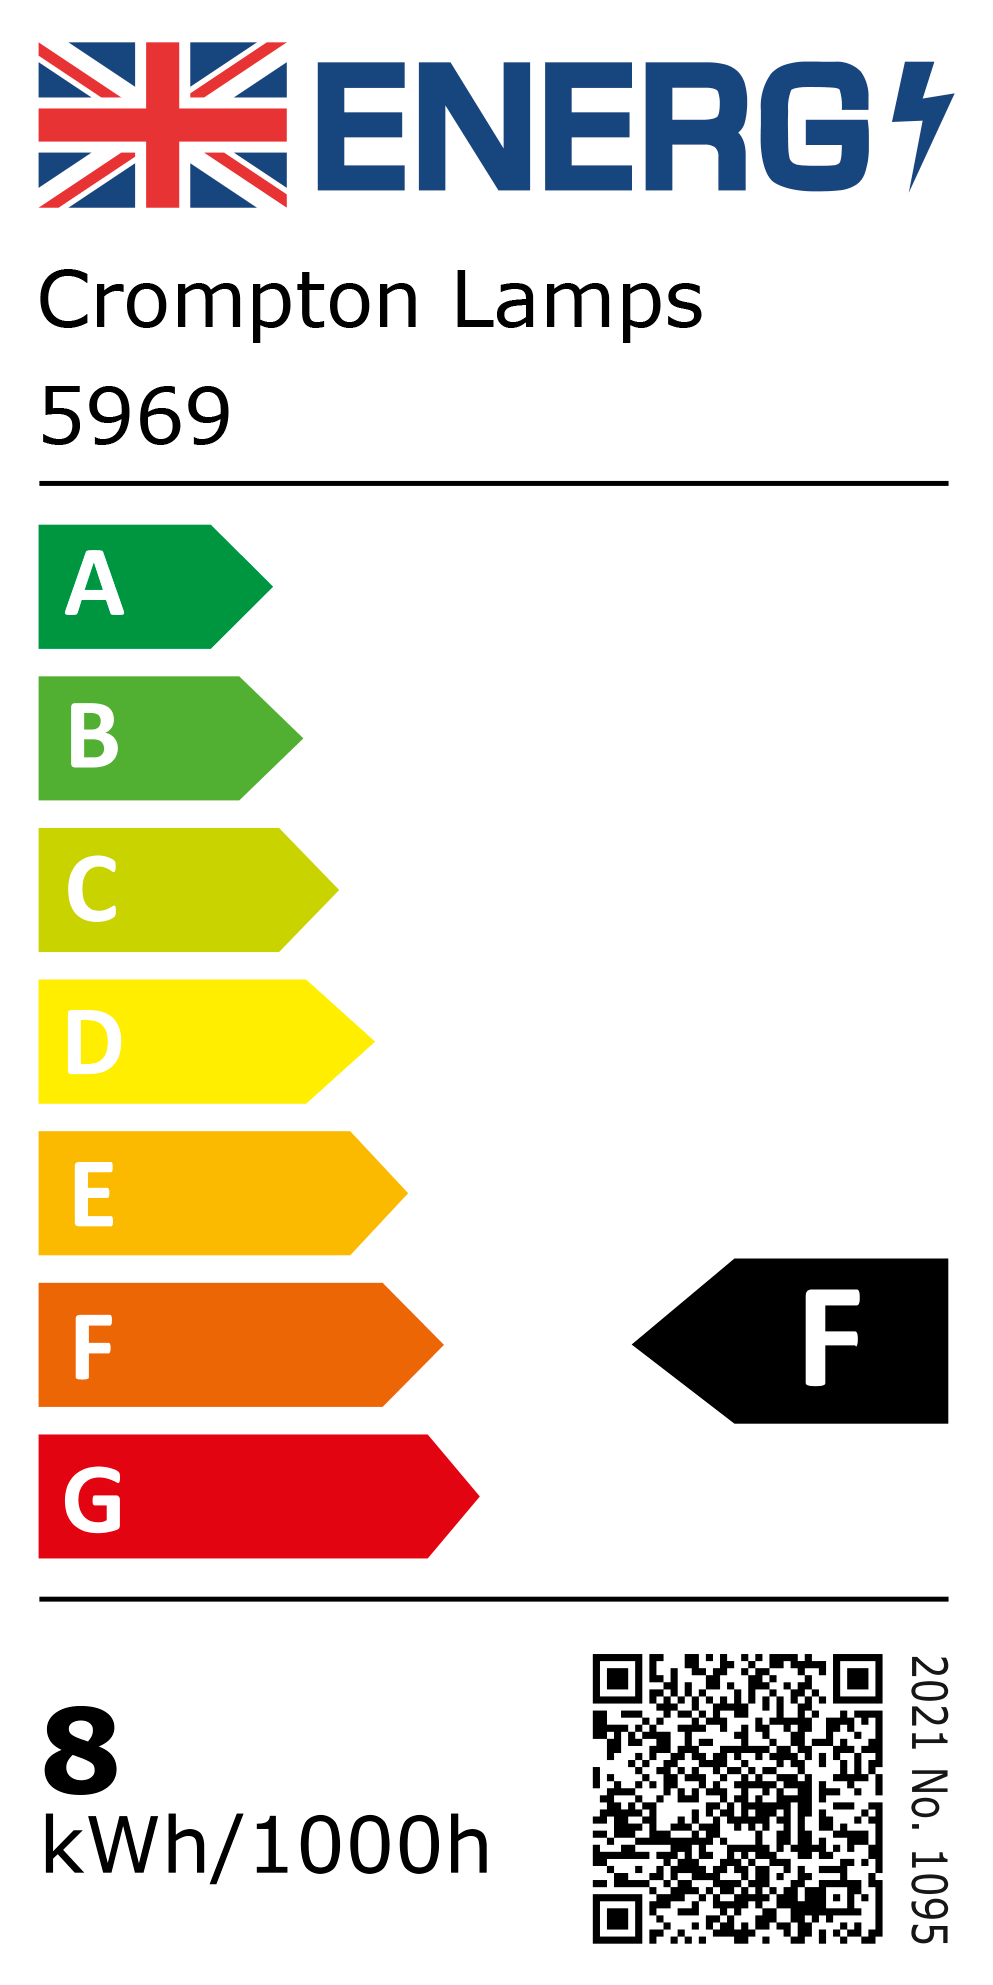 New 2021 Energy Rating Label: Stock Code 5969